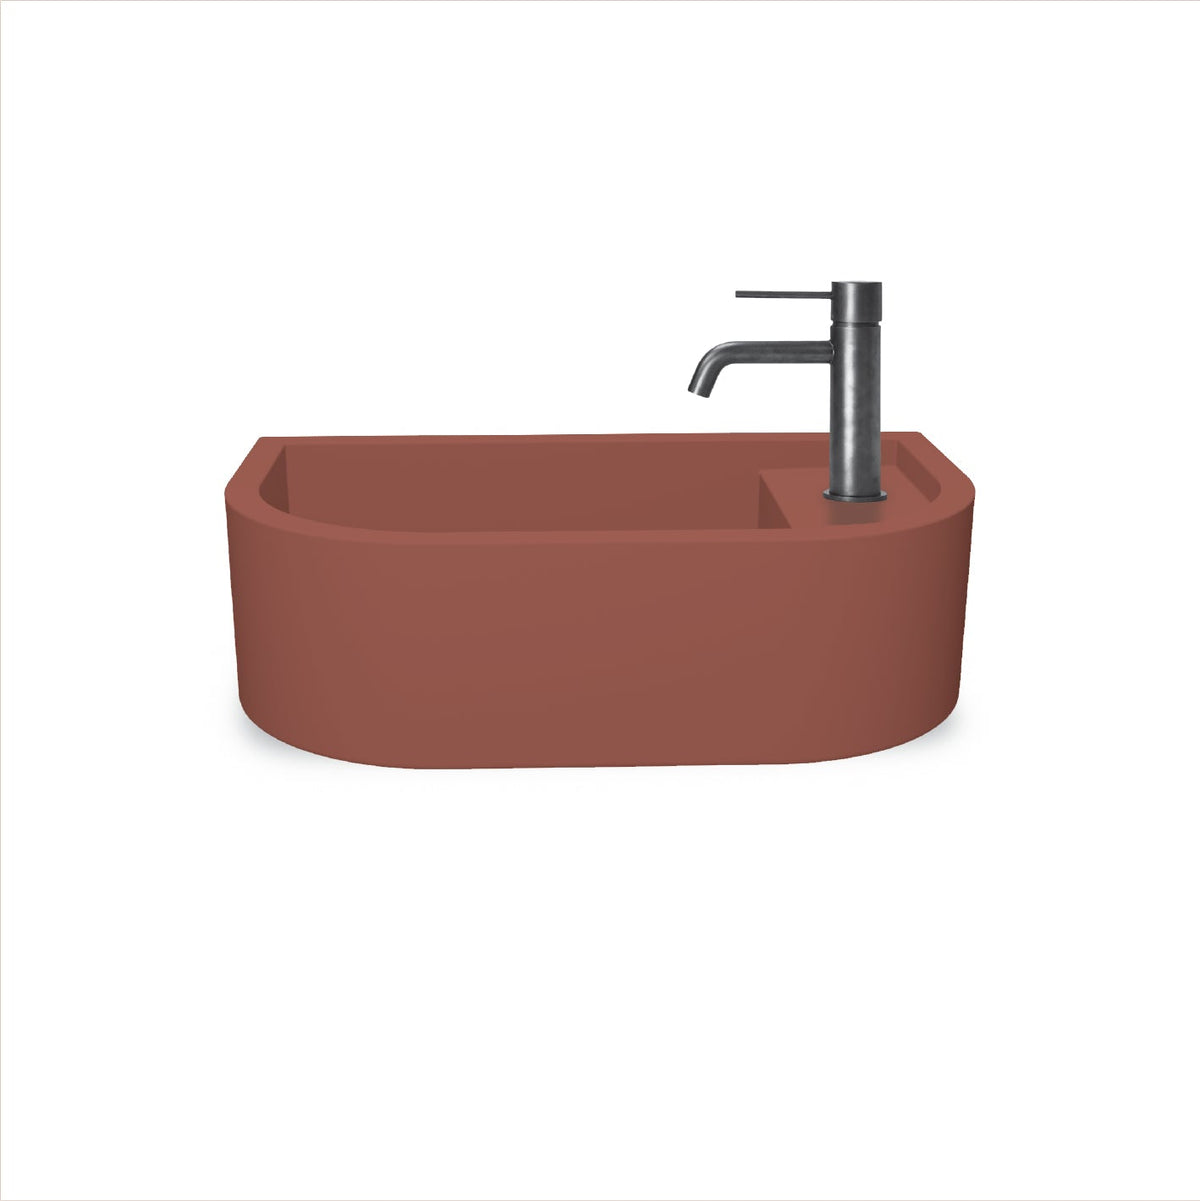 Loop 01 Basin - Overflow - Wall Hung (Musk,Tap Hole,Chrome)